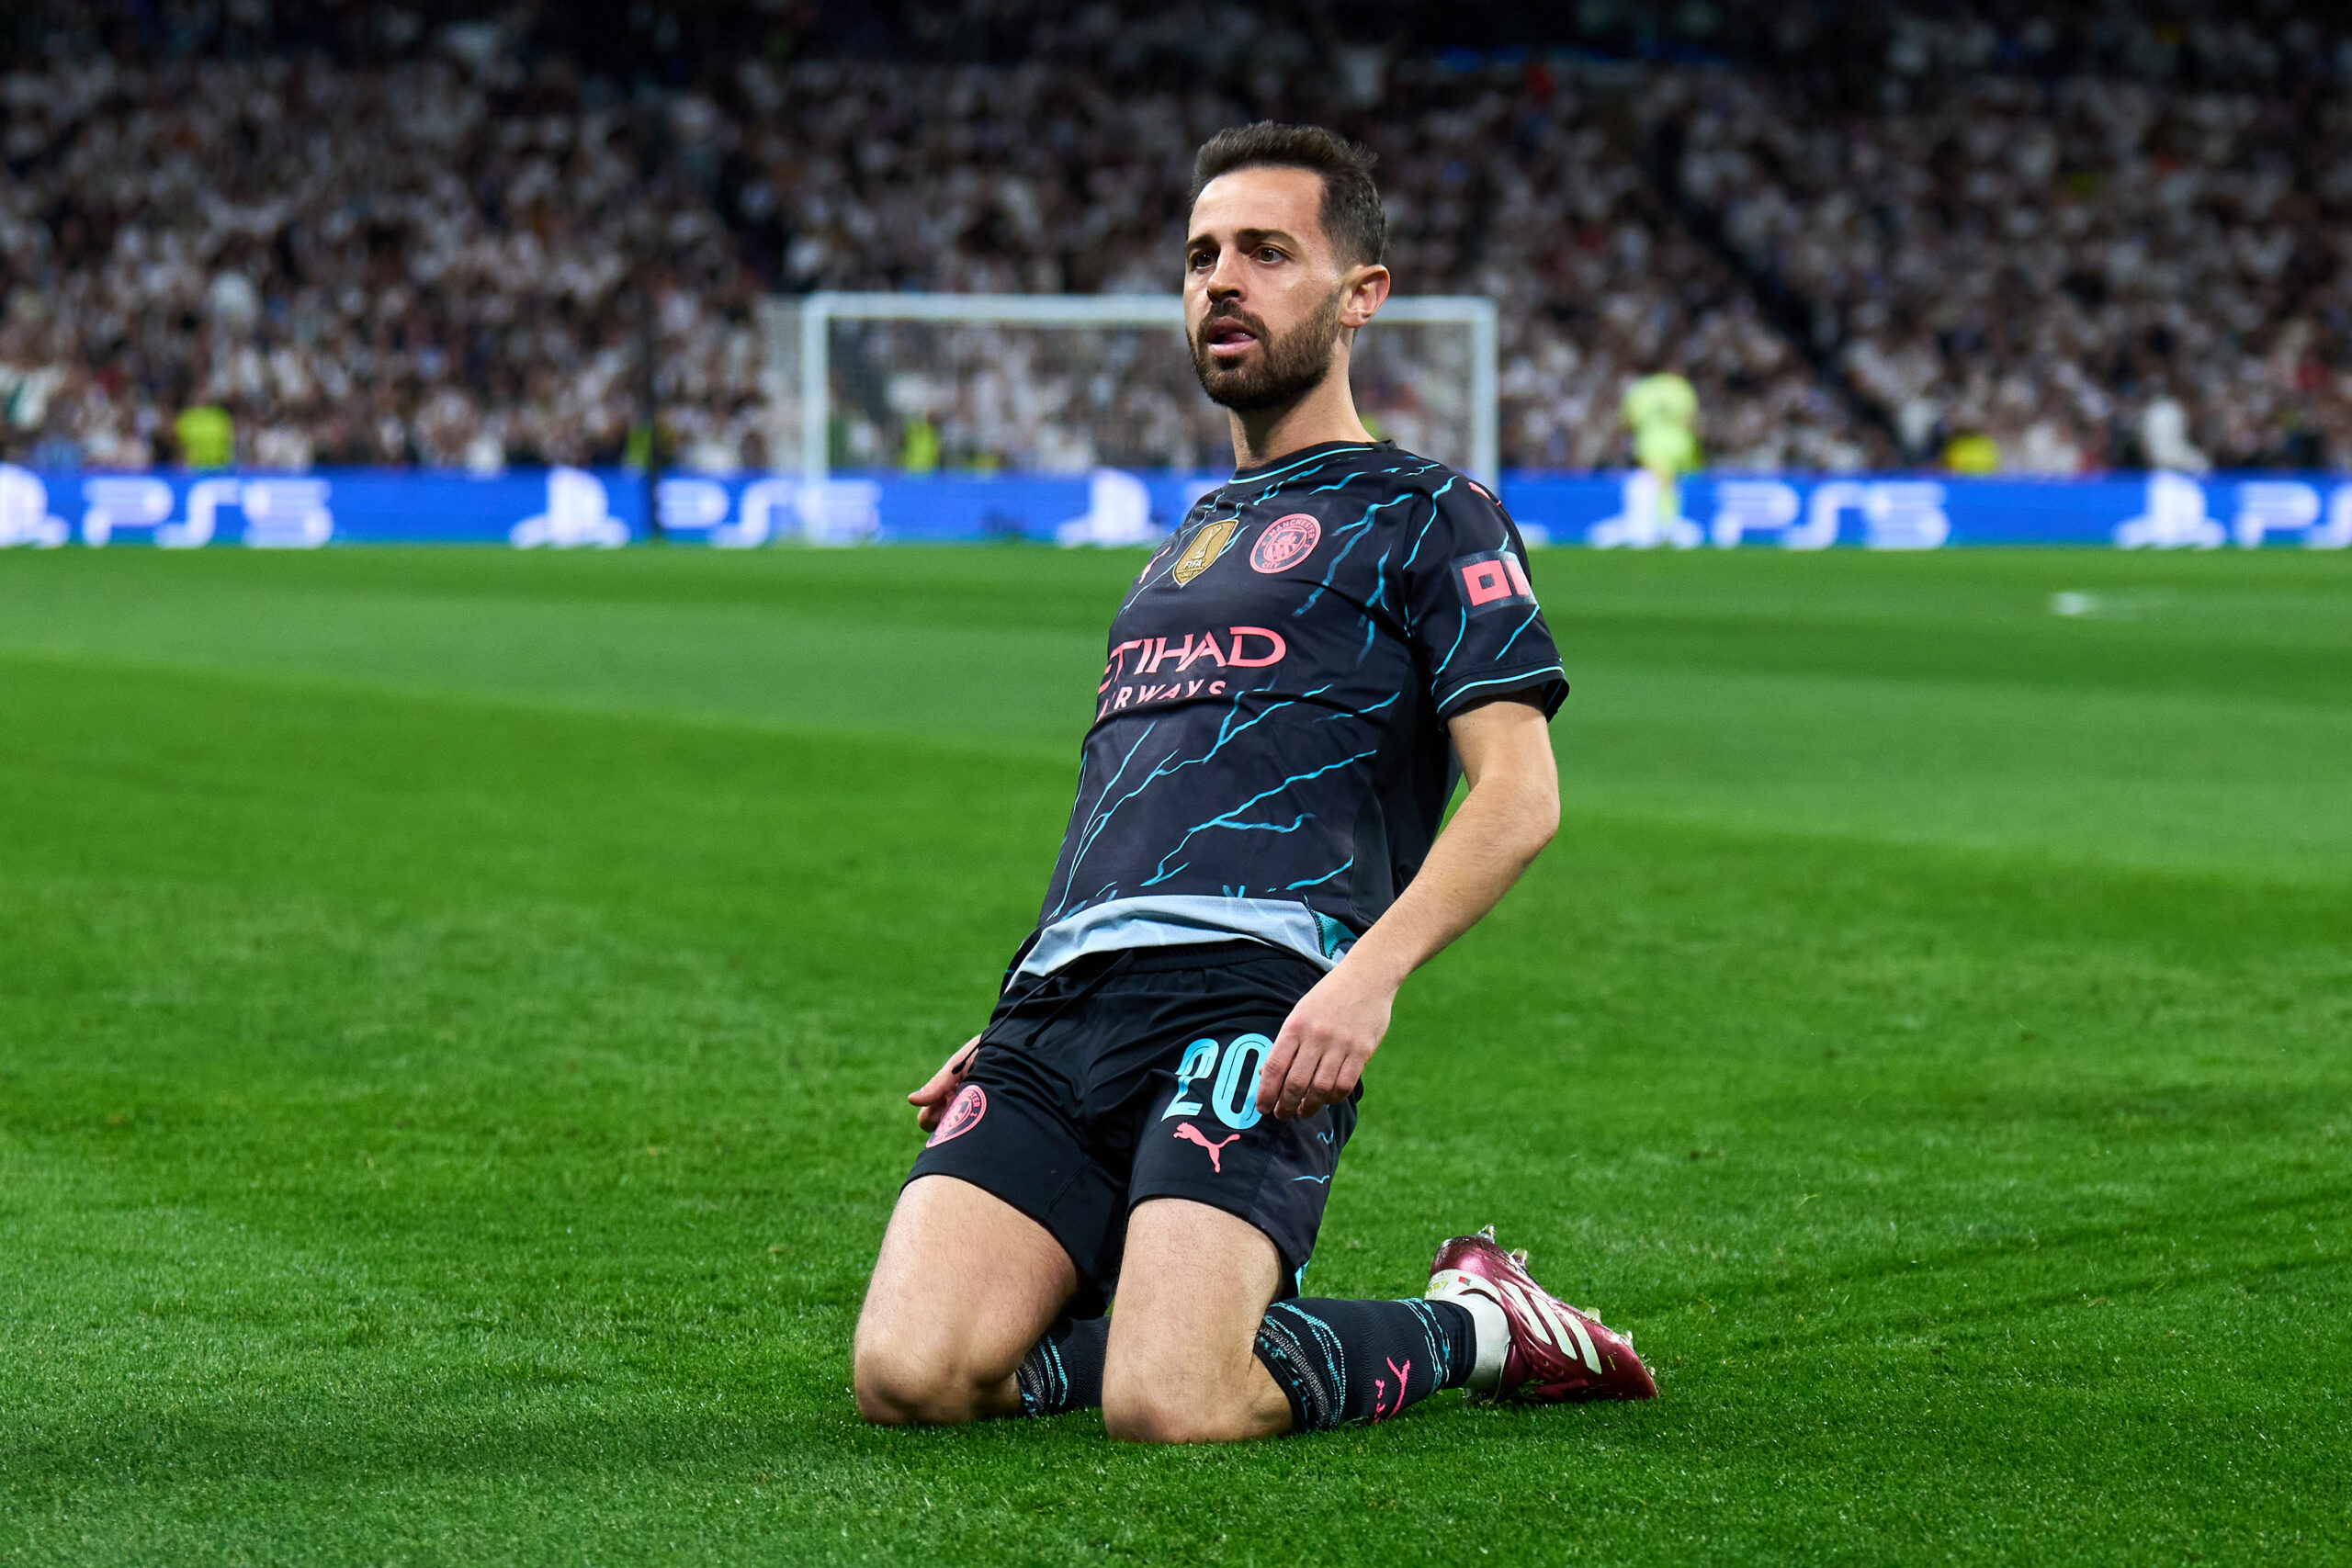 MADRID, SPAIN - APRIL 09: Bernardo Silva of Manchester City celebrates scoring his team's first goal during the UEFA Champions League quarter-final first leg match between Real Madrid CF and Manchester City at Estadio Santiago Bernabeu on April 09, 2024 in Madrid, Spain.